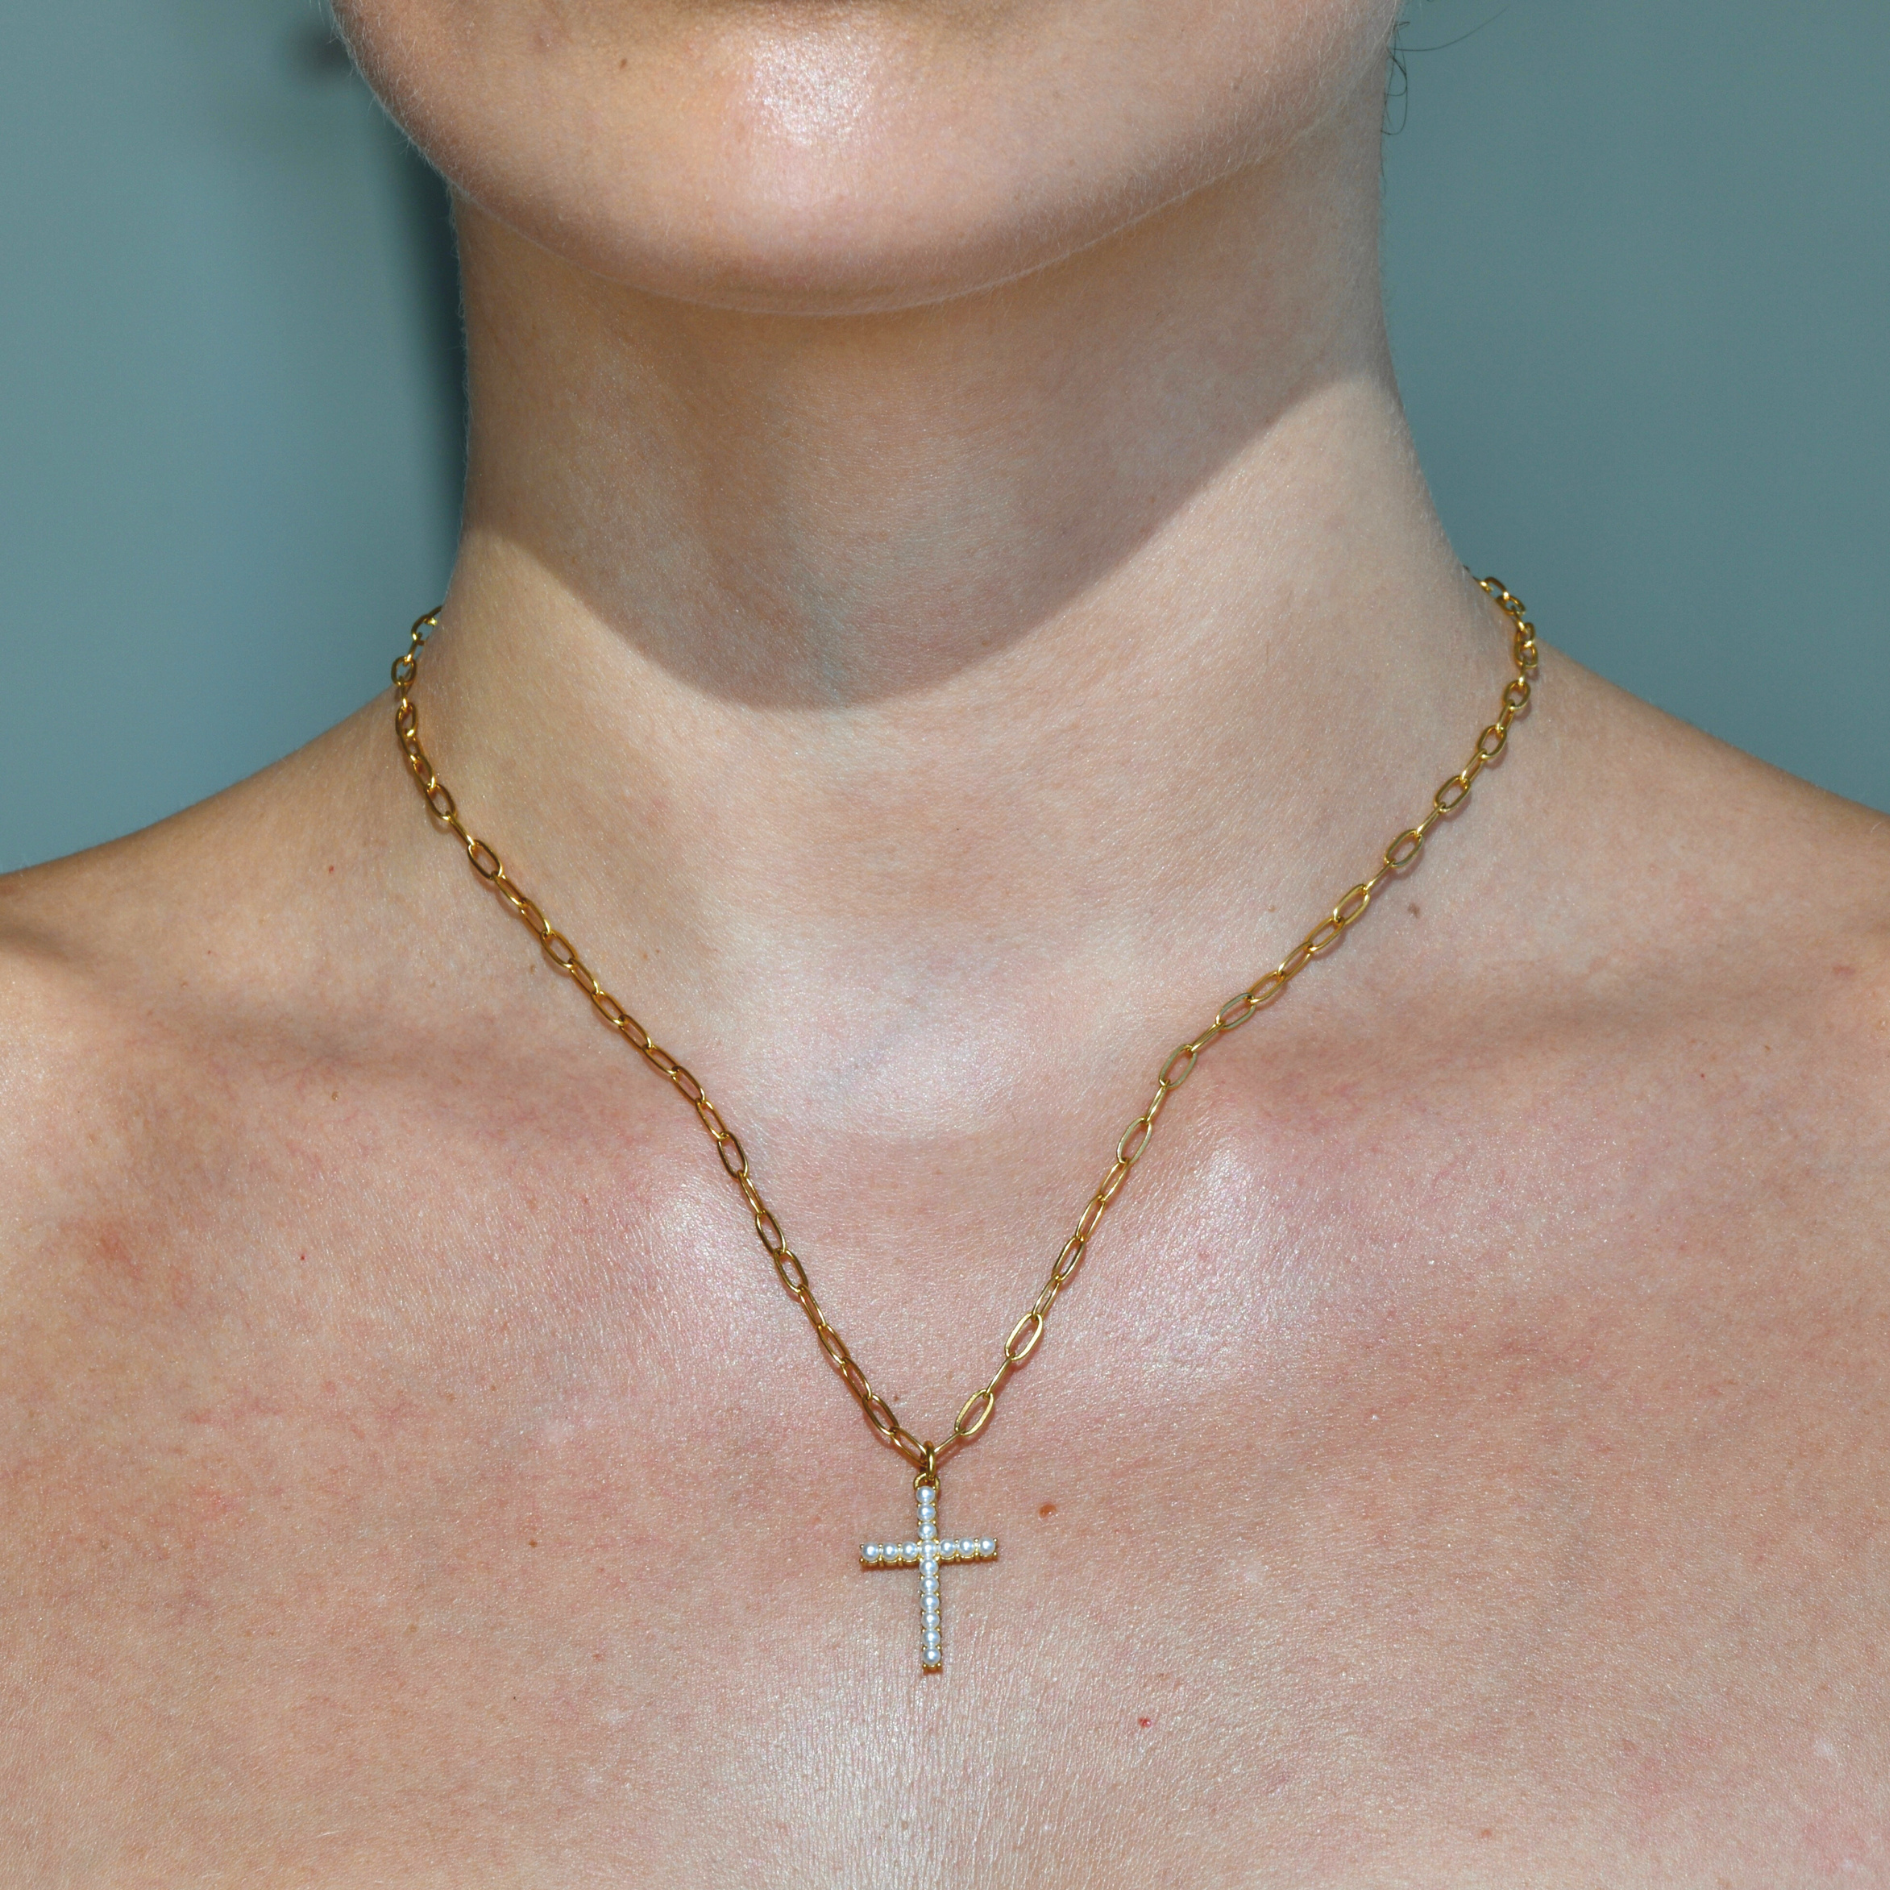 Paperclip gold chain. Gold Cross pendant with small little white pearls attached in all the surface of the cross pendant. Pray pearl cross gold necklace.